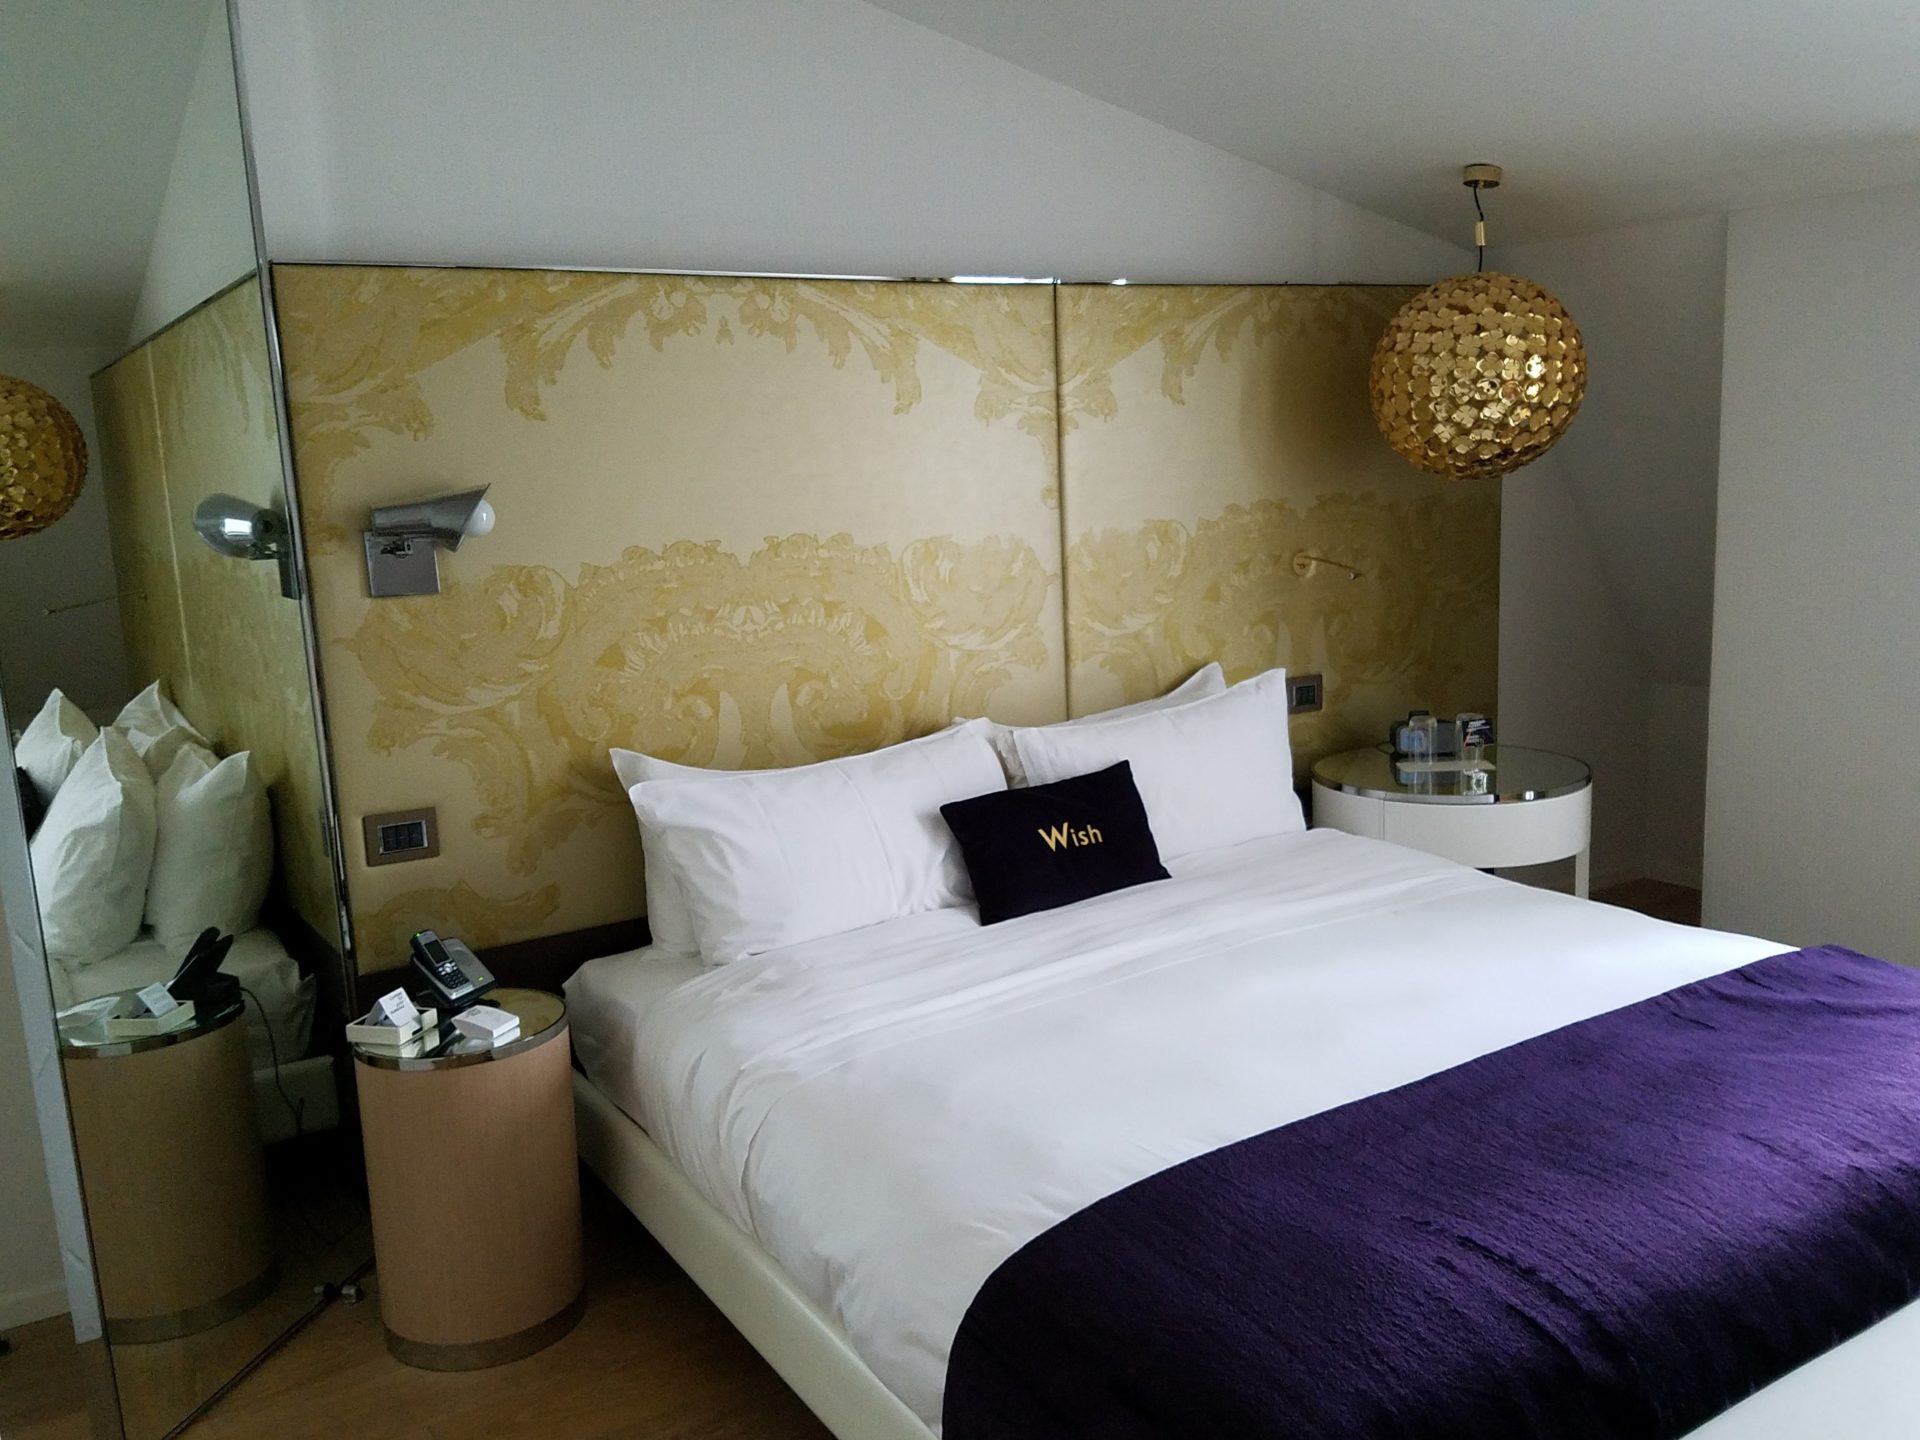 a bed with a purple blanket and a gold wall